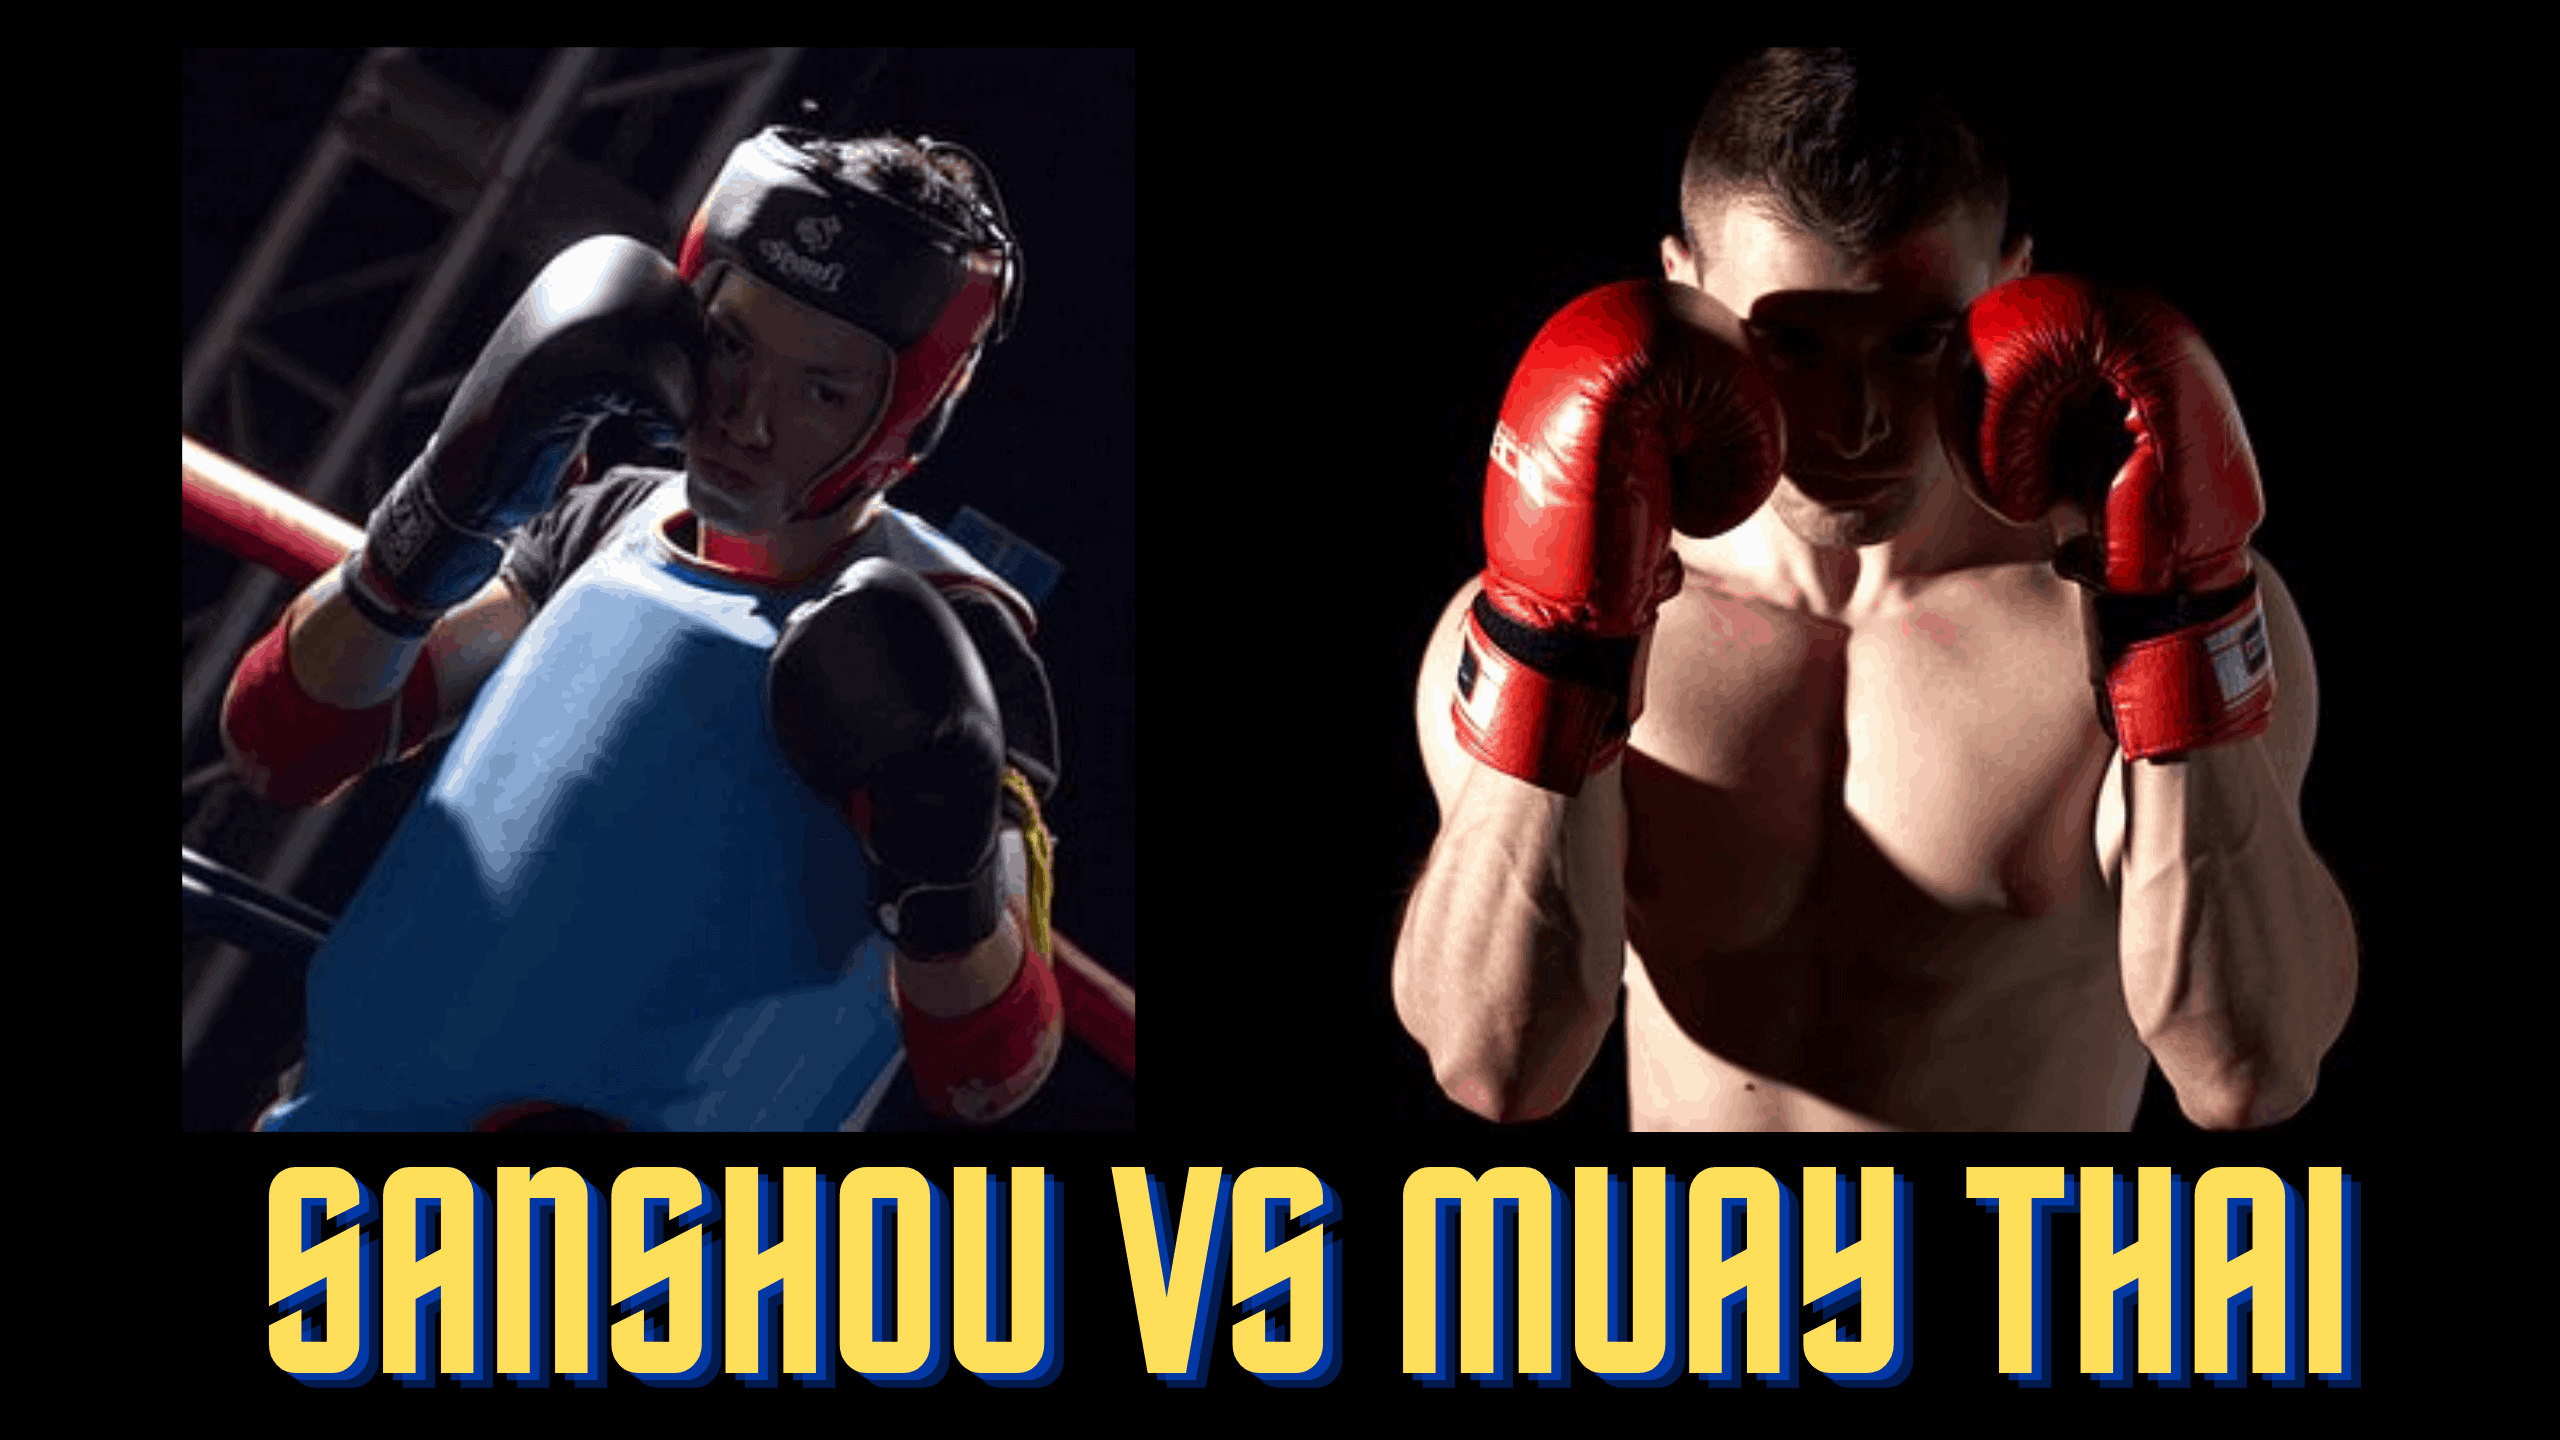 Sanshou vs Muay Thai -What Are the Main Differences?